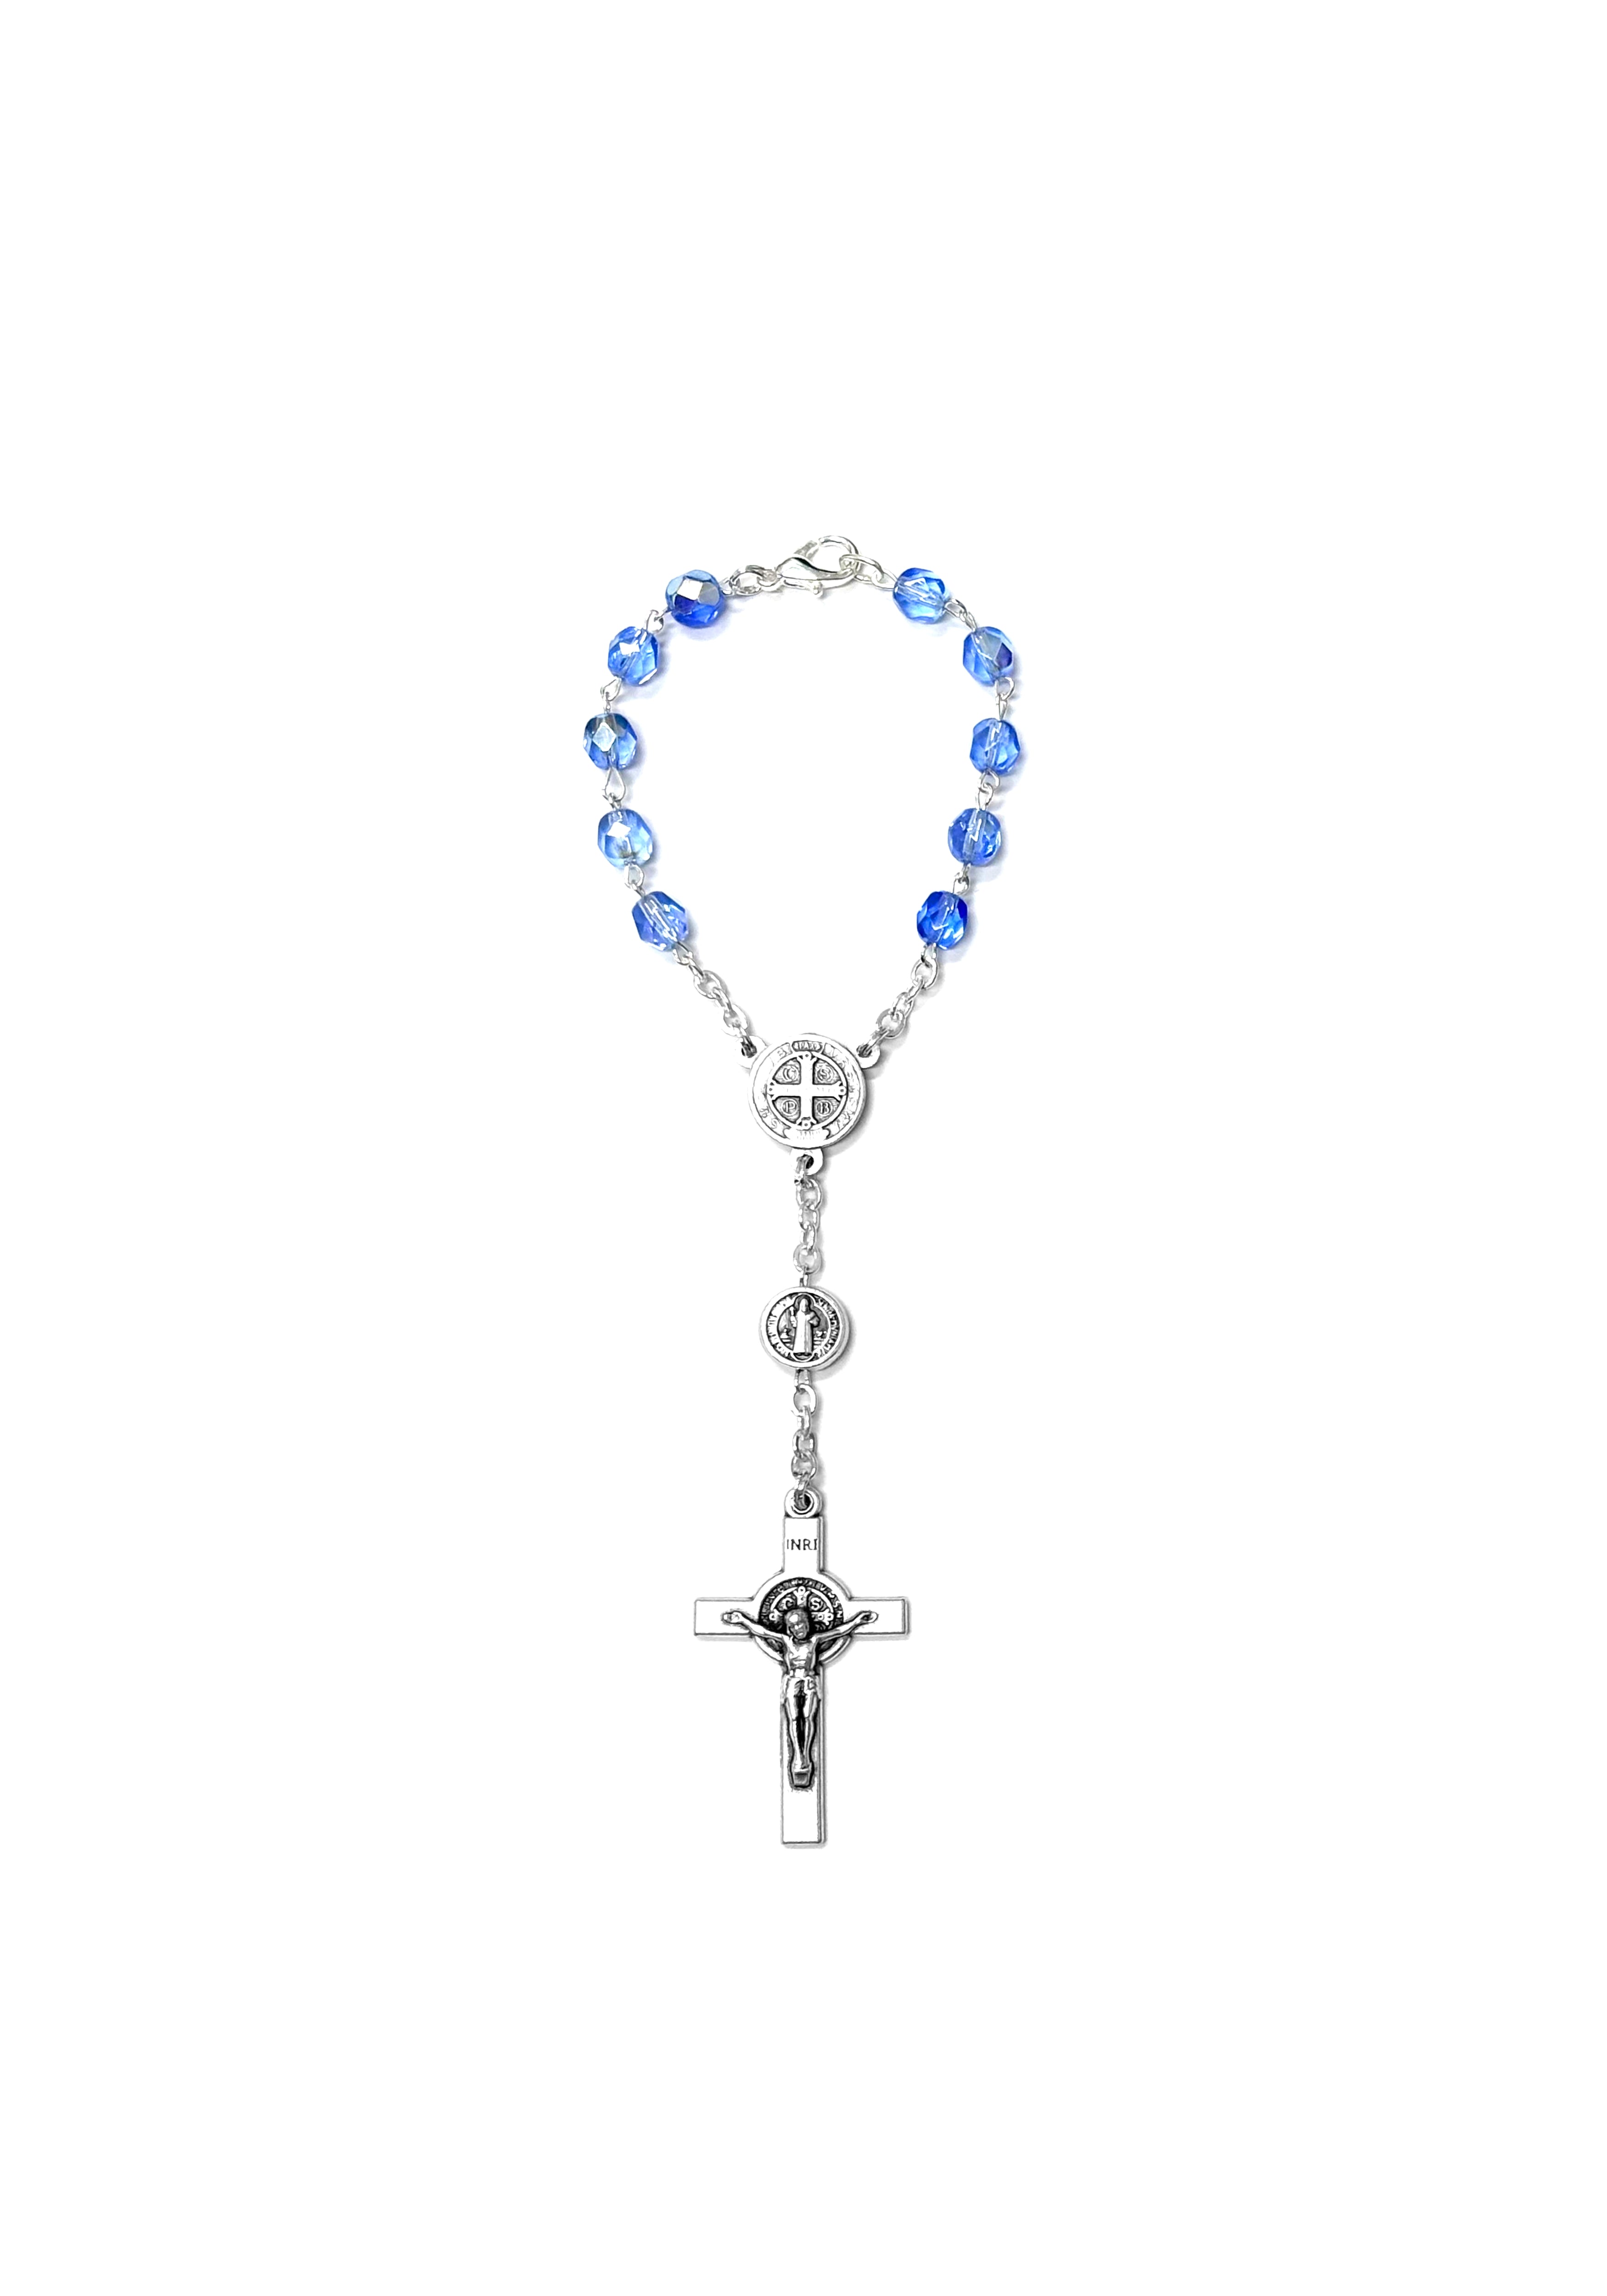 Blue crystal car rosary with medal and cross of Saint Benedict